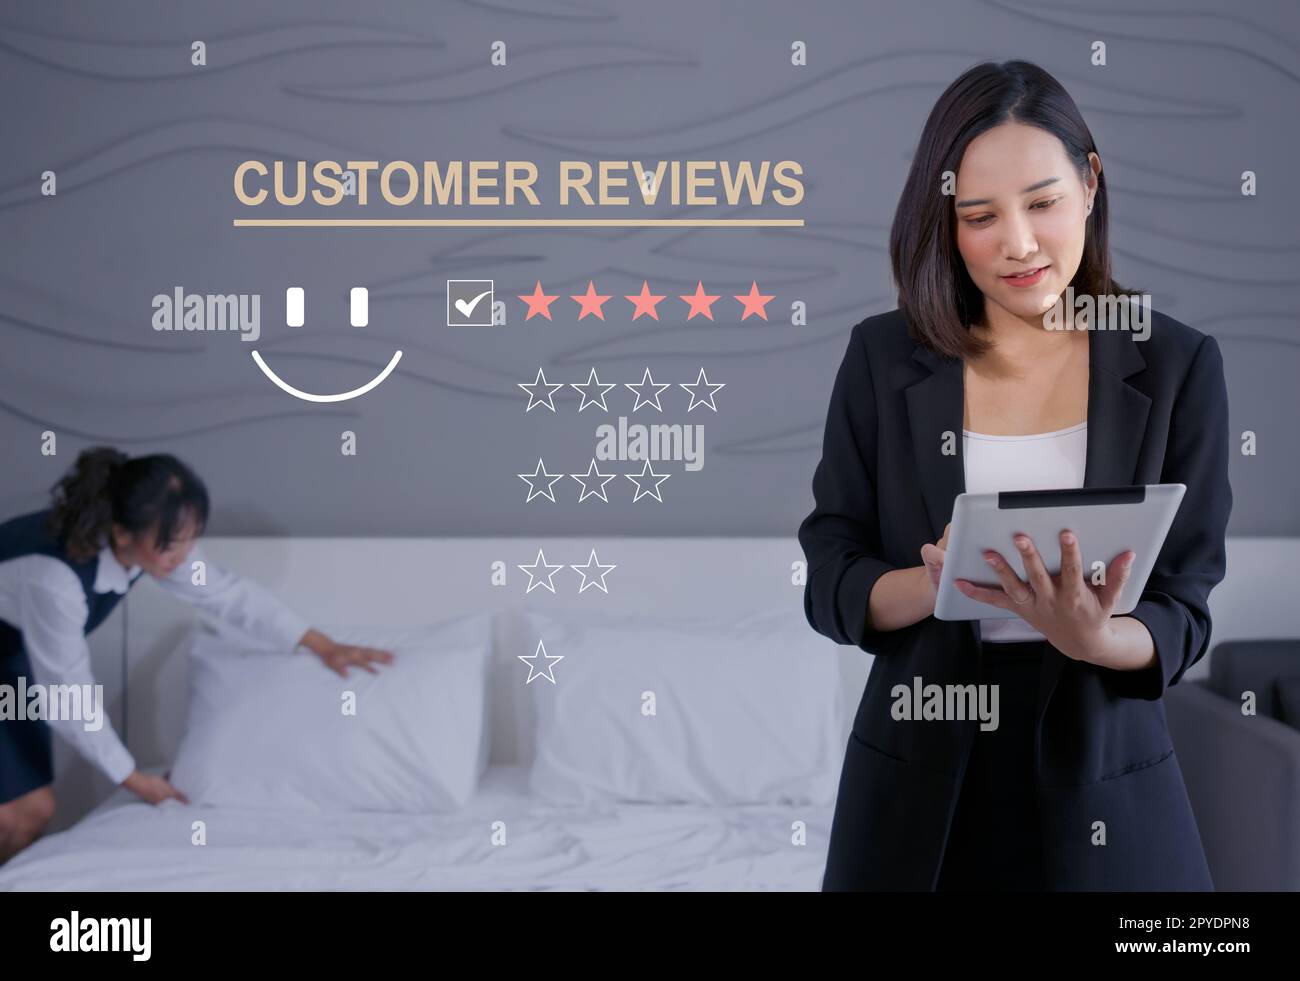 Customer review satisfaction feedback survey concept, User give rating to service experience on tablet computer, evaluate quality of service leading to reputation ranking of hotel business. Stock Photo